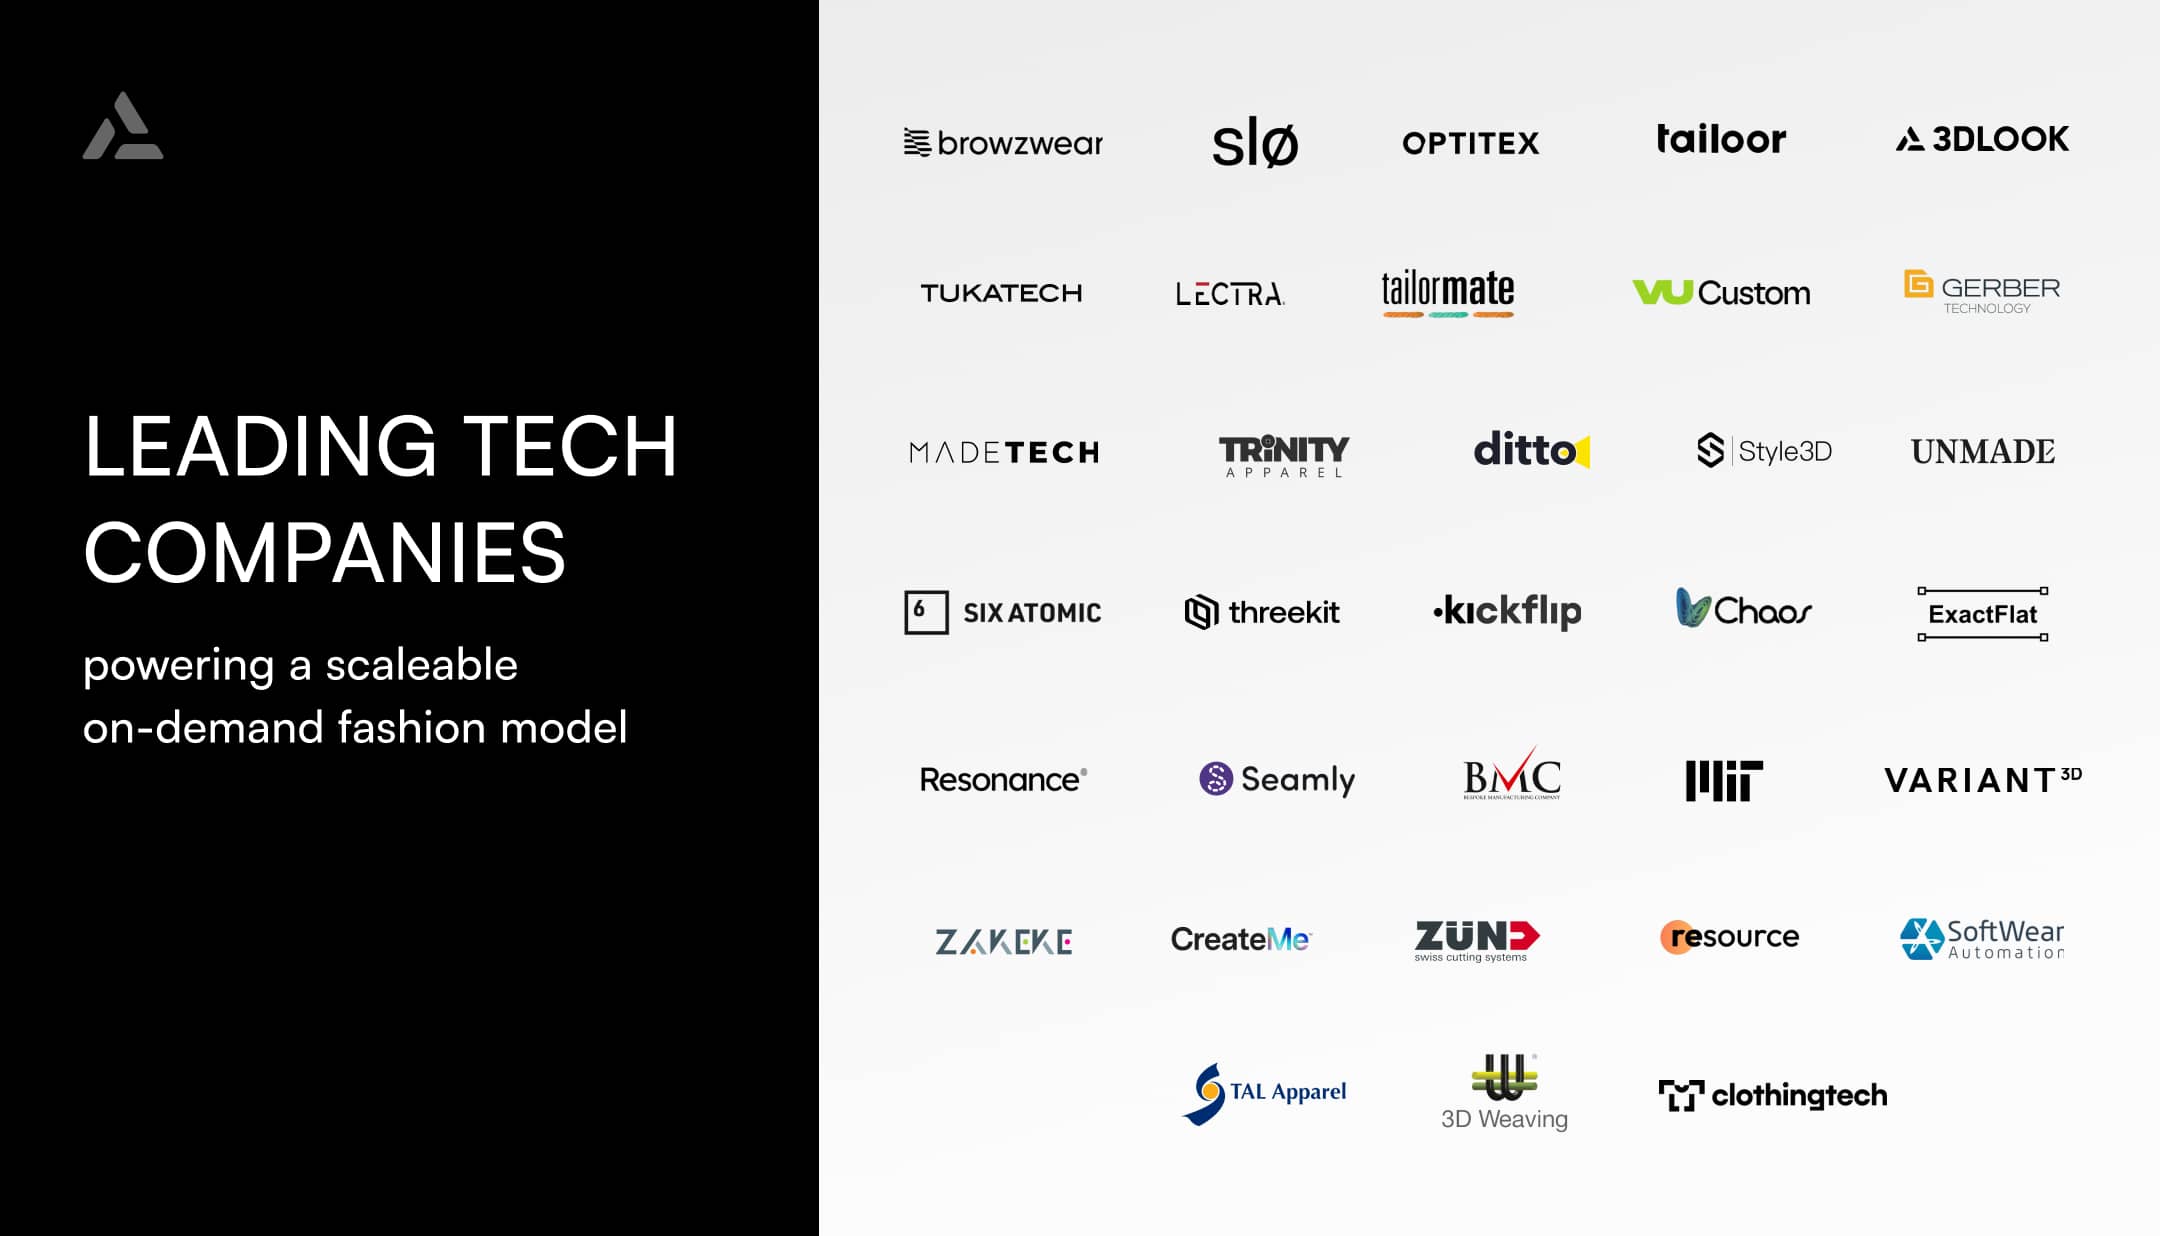 Logos of various tech companies, including browzwear, Tukatech, Lectra, and Shima Seiki, presented on a white background with the heading "Leading Tech Companies in Industry Tech 2024" on the left.